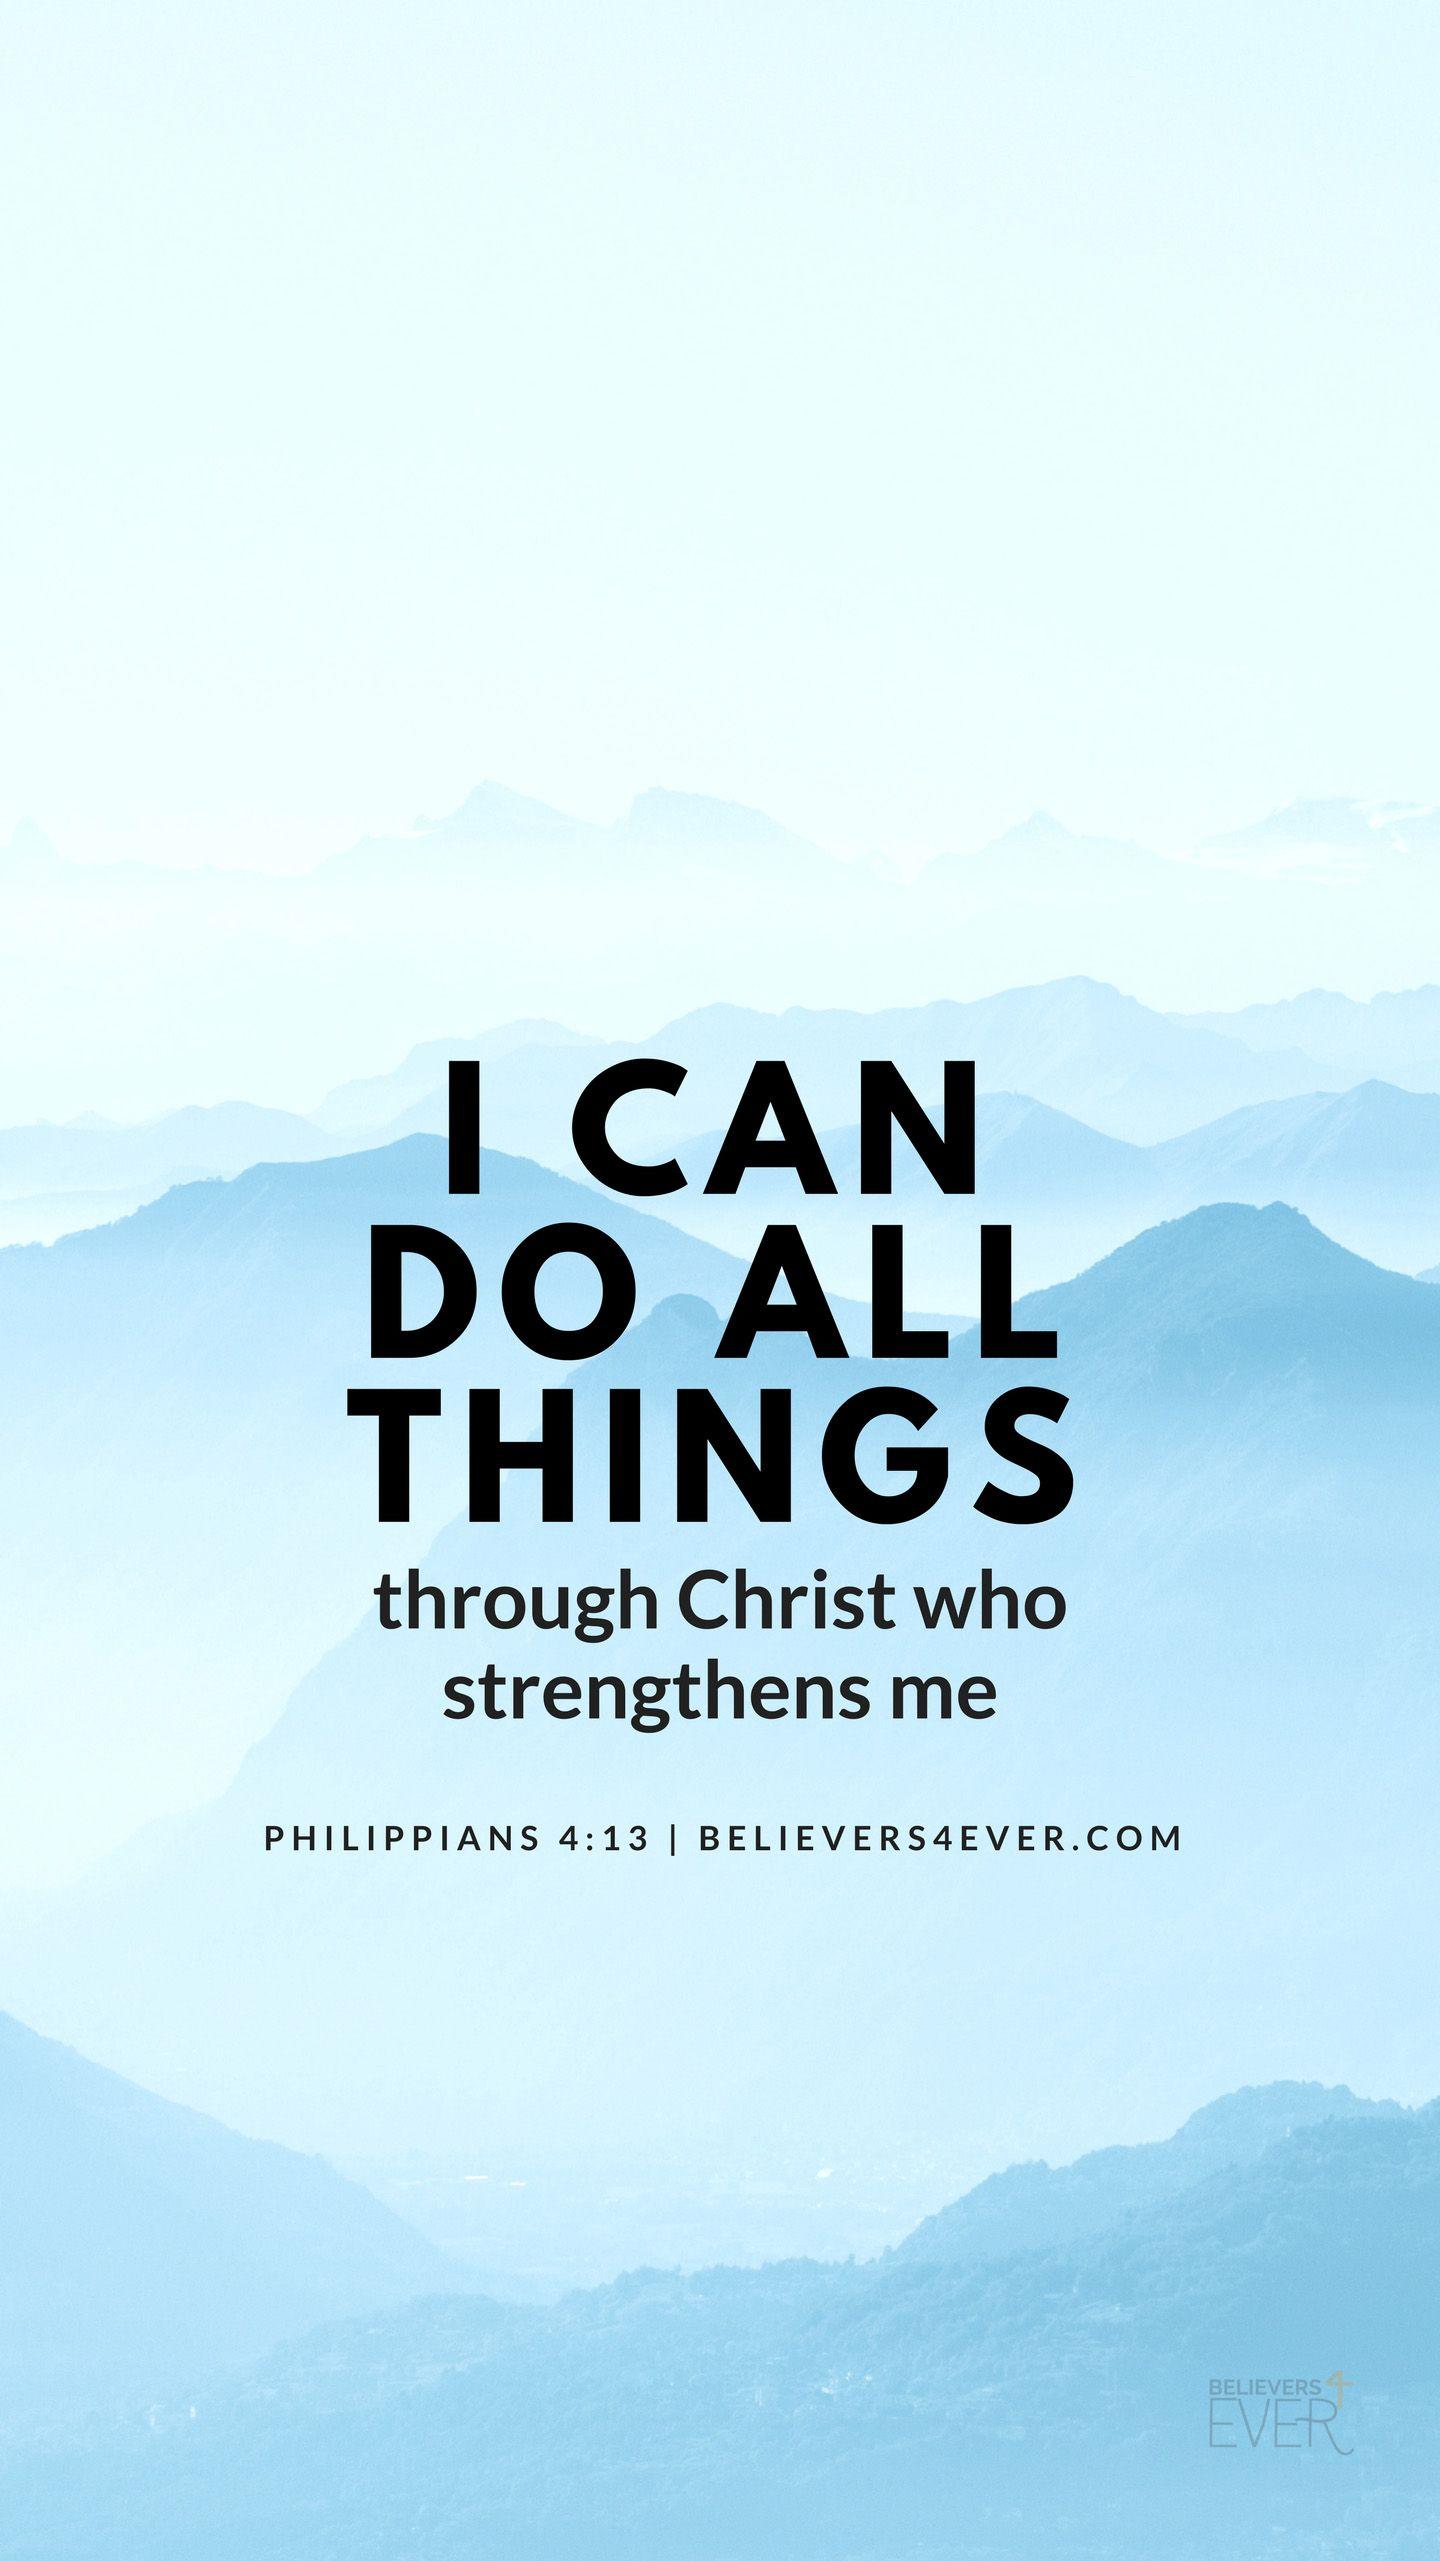 I can do all things. Bible verse wallpaper, Verses wallpaper